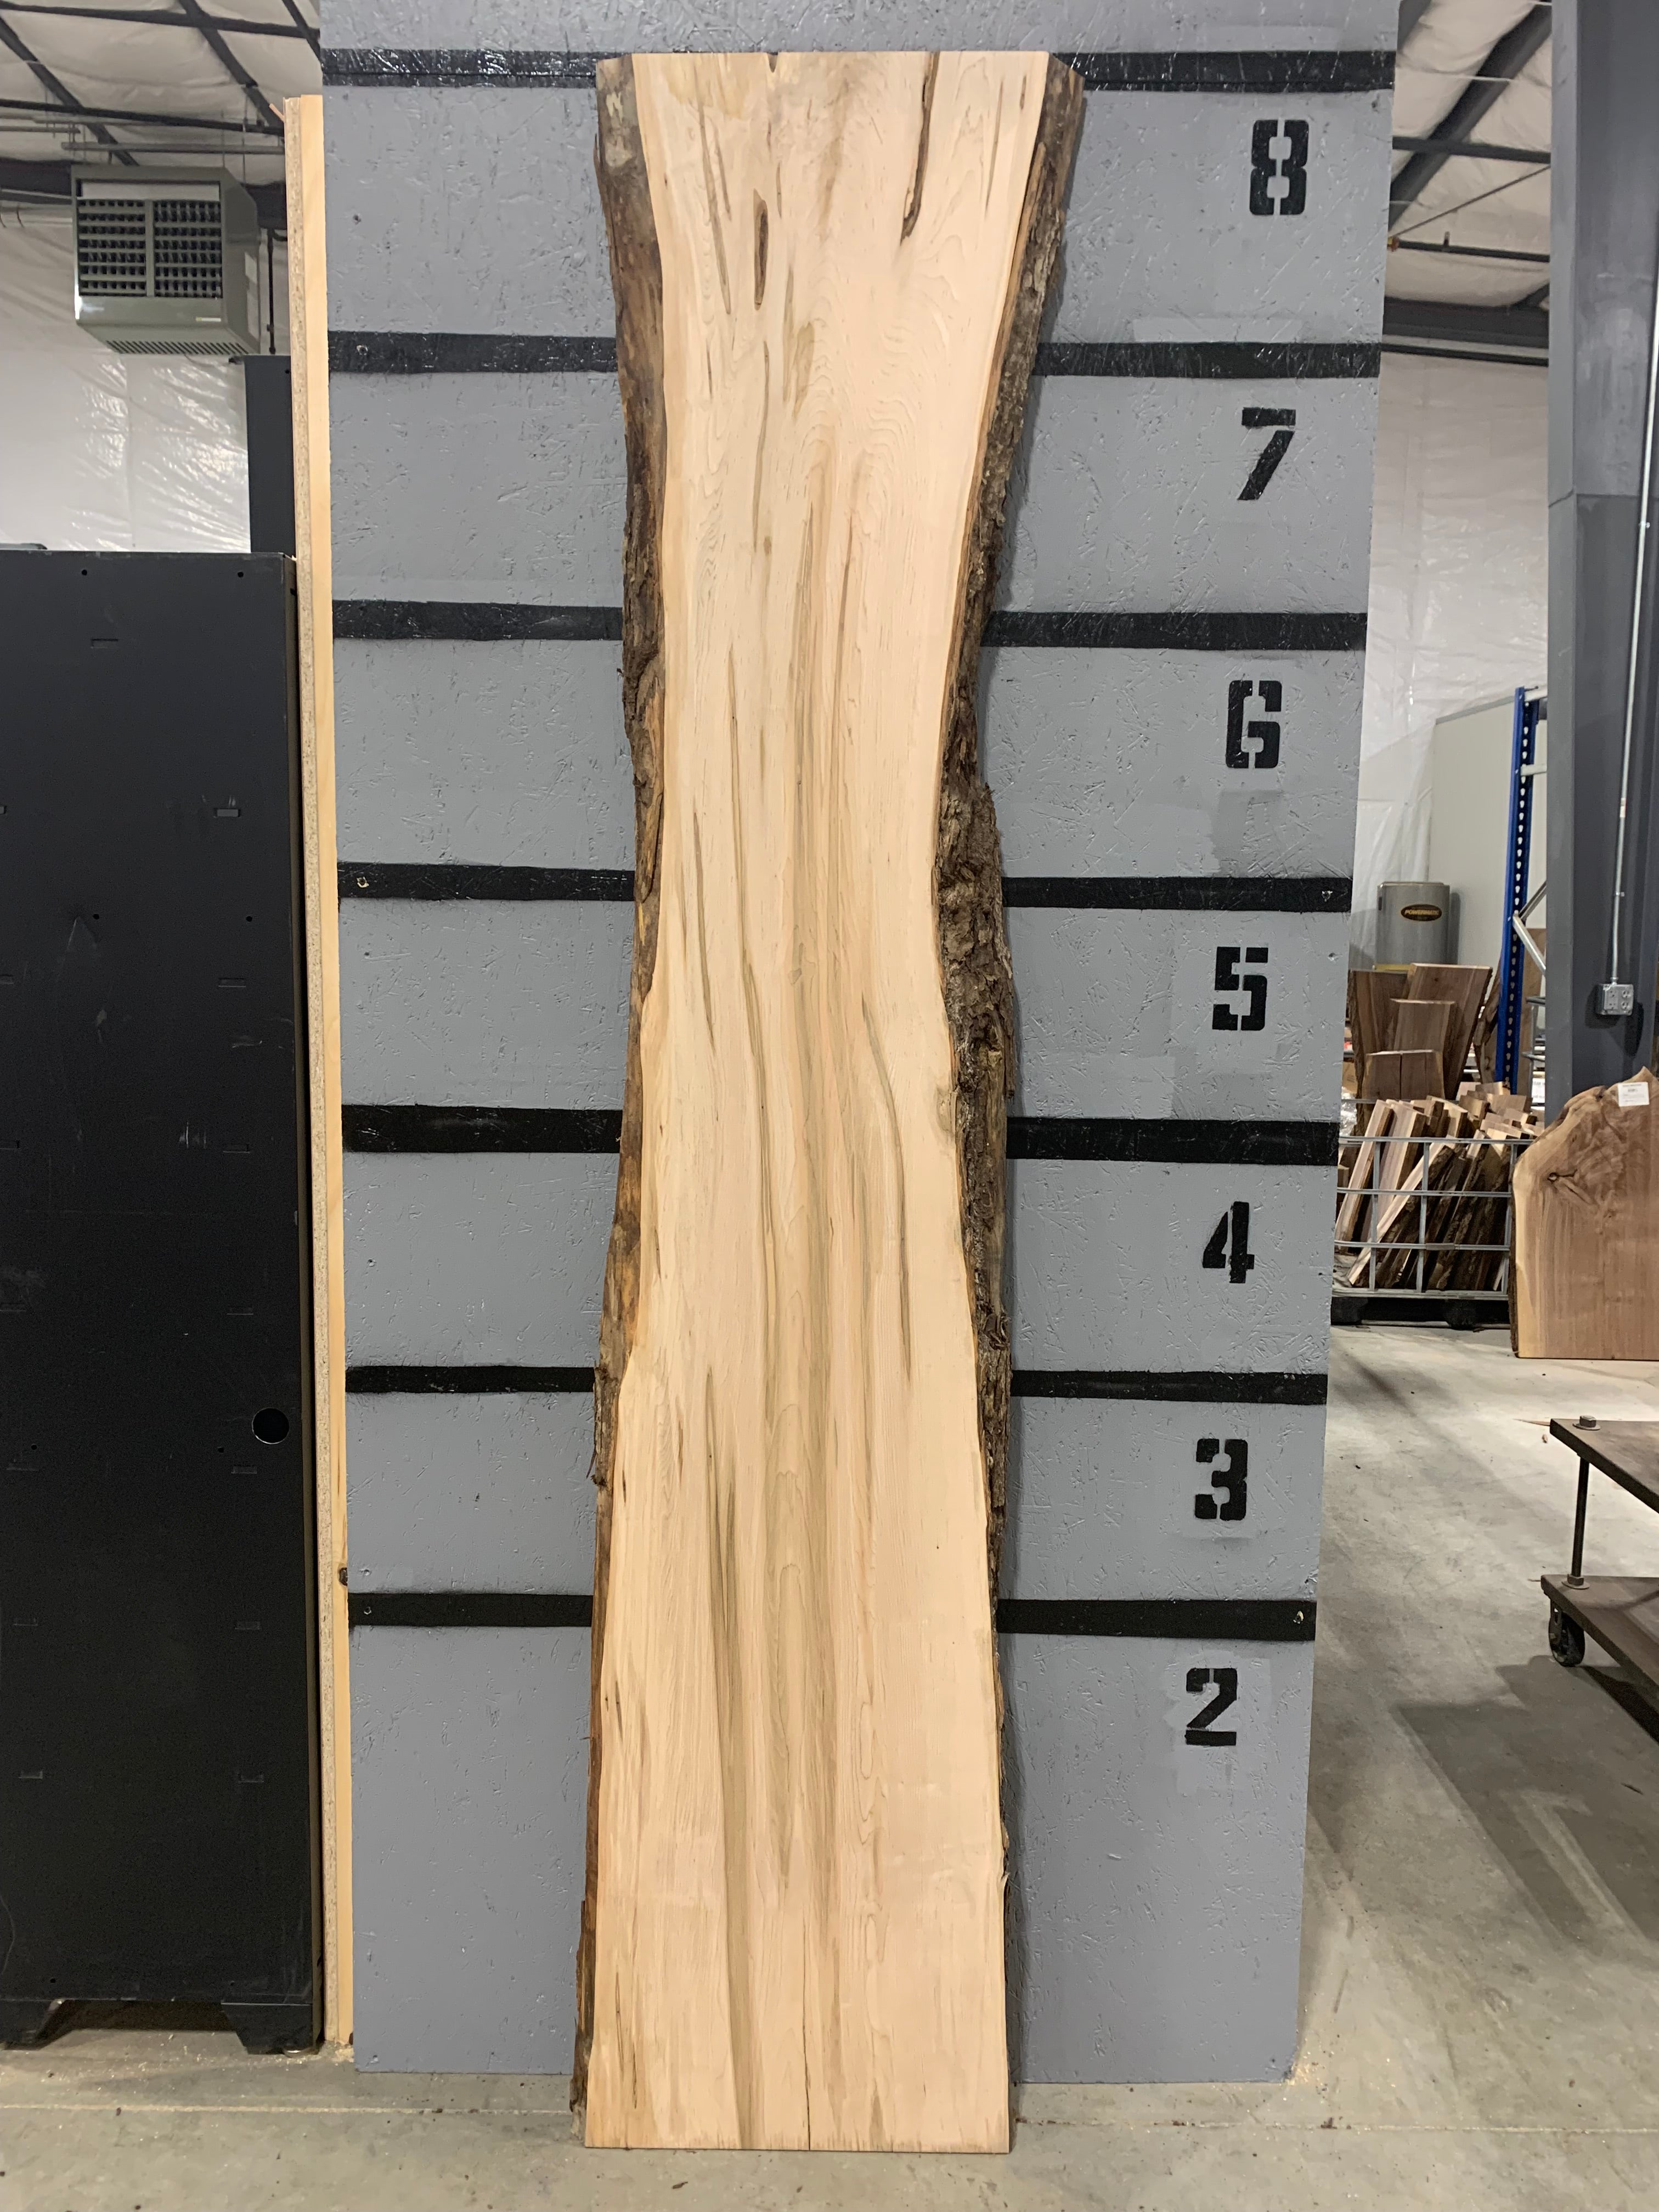 Ambrosia maple slab available for purchase at Urban Industrial Design.